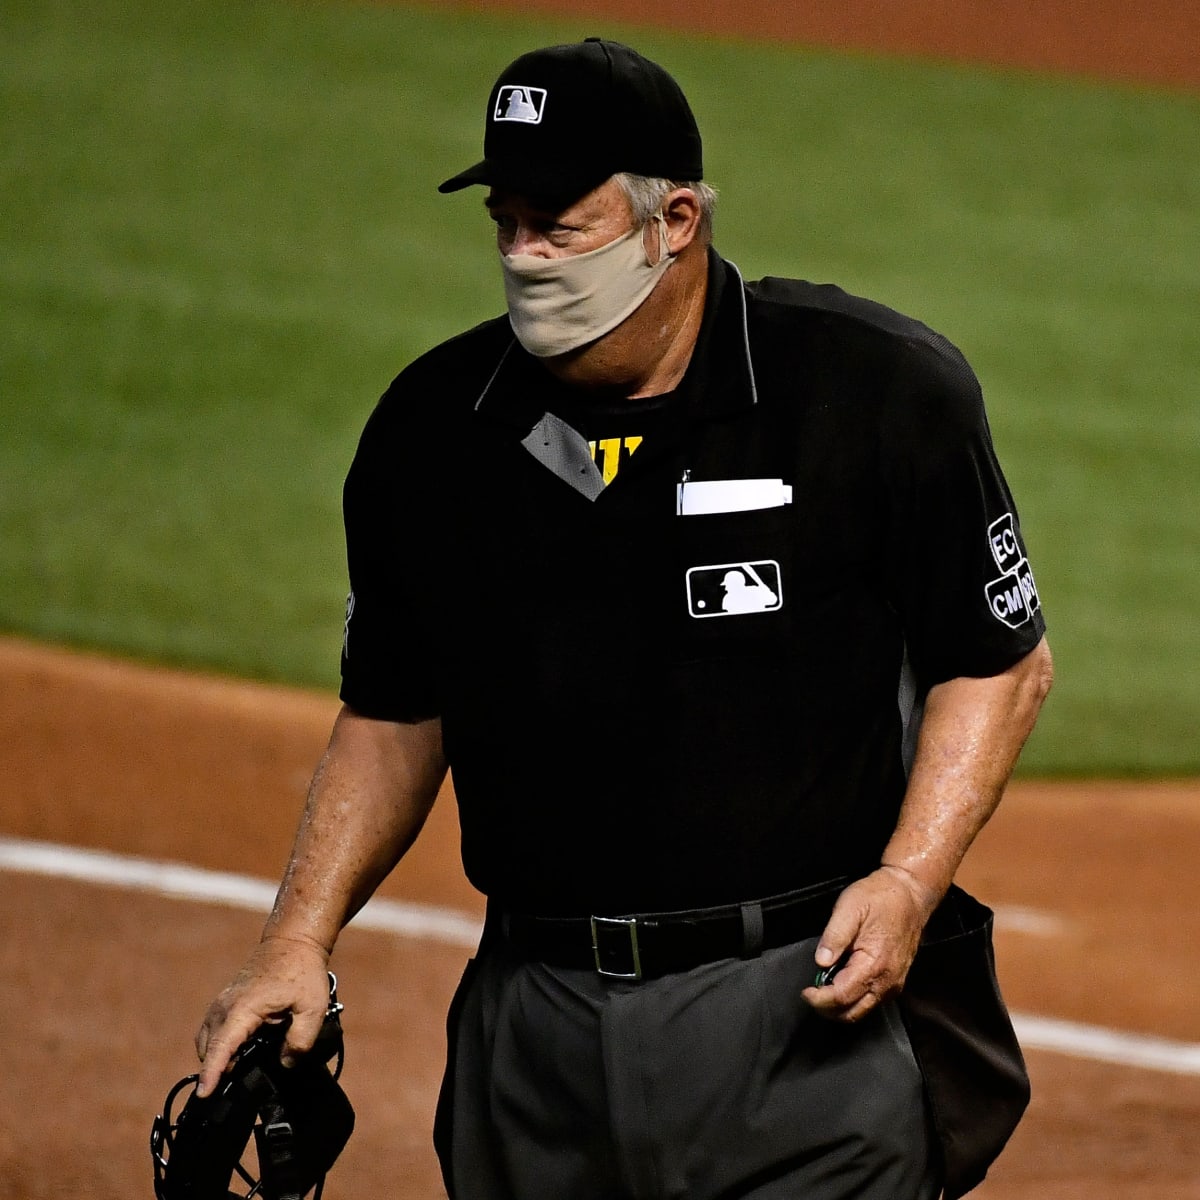 Umpire Joe West may be advantage for Cardinals over Dodgers